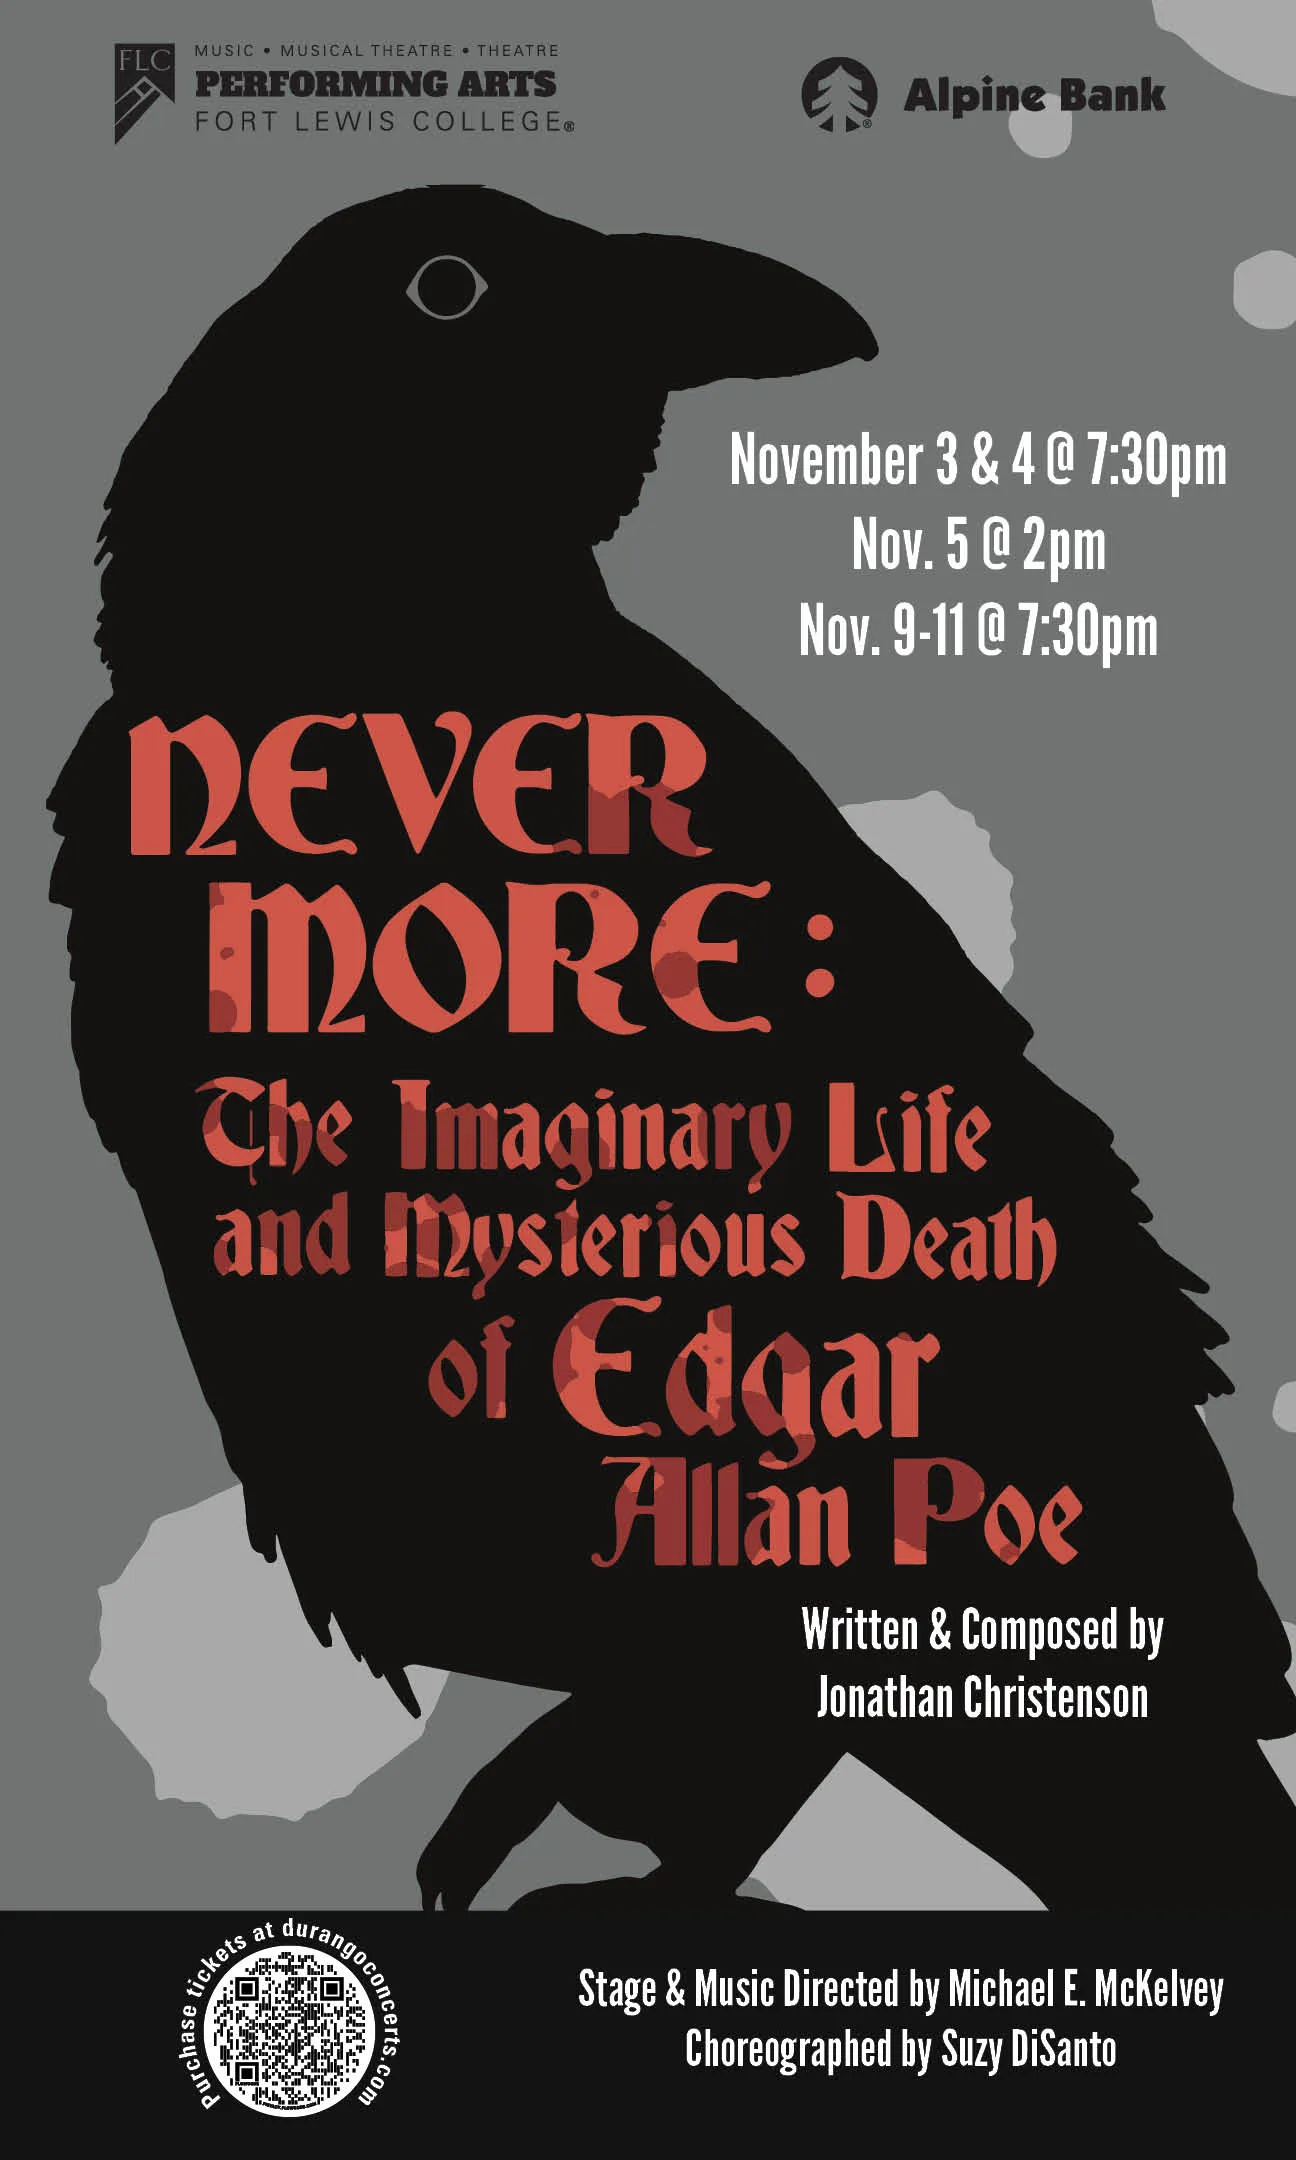 NEVERMORE: THE IMAGINARY LIFE AND MYSTERIOUS DEATH OF EDGAR ALLAN POE